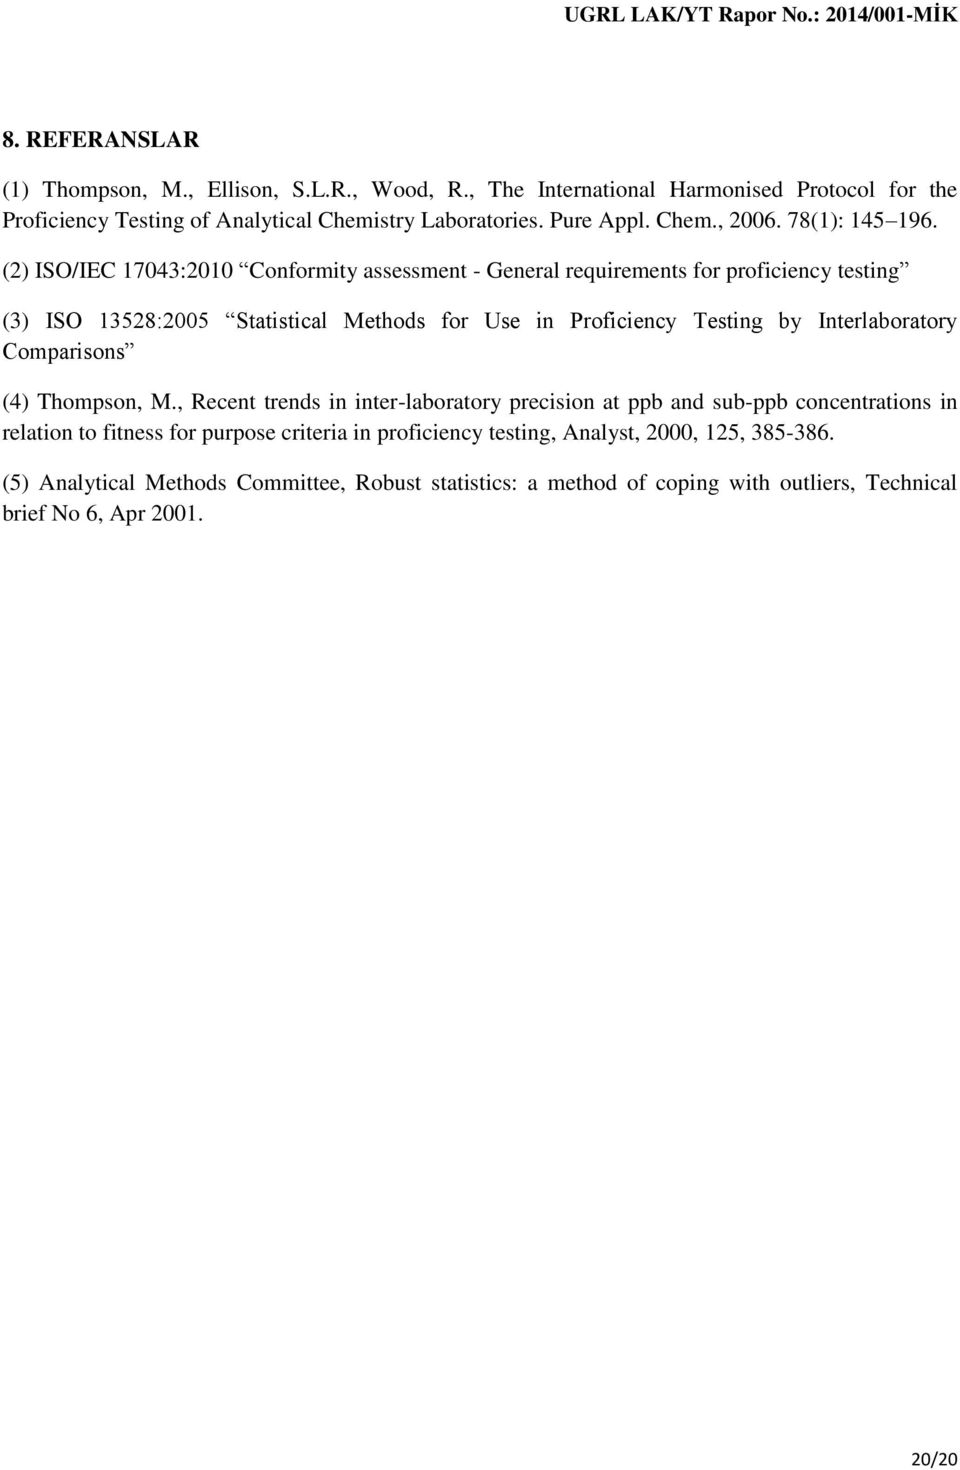 (2) ISO/IEC 17043:2010 Conformity assessment - General requirements for proficiency testing (3) ISO 13528:2005 Statistical Methods for Use in Proficiency Testing by